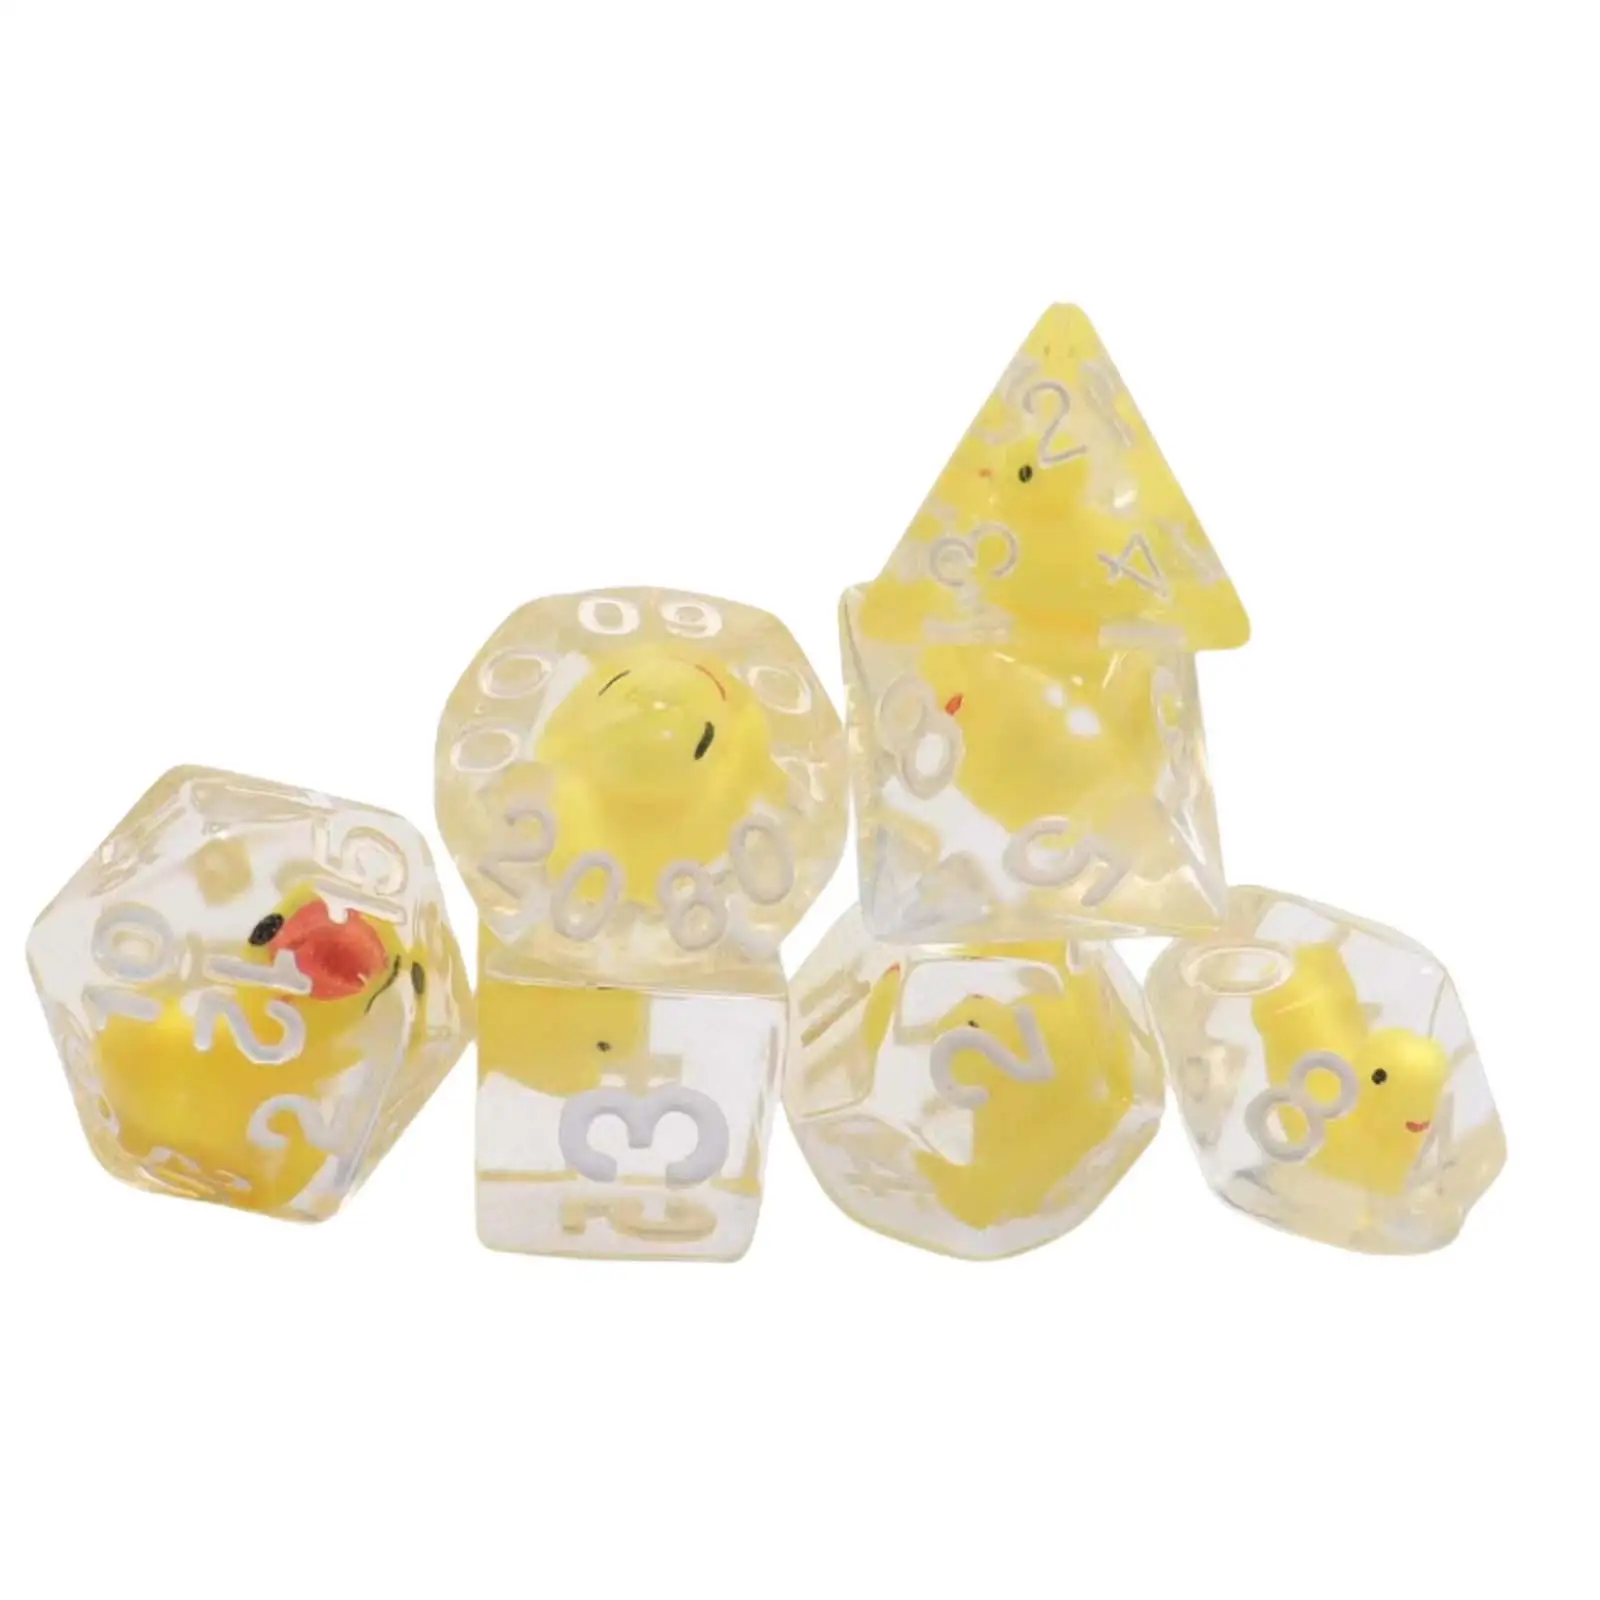 7x Acrylic Dices Playing Dices Filled with Ducks Animal D4 D8 D10 D12 D20 Party Favors Polyhedral Dices for Bar Party Card Game